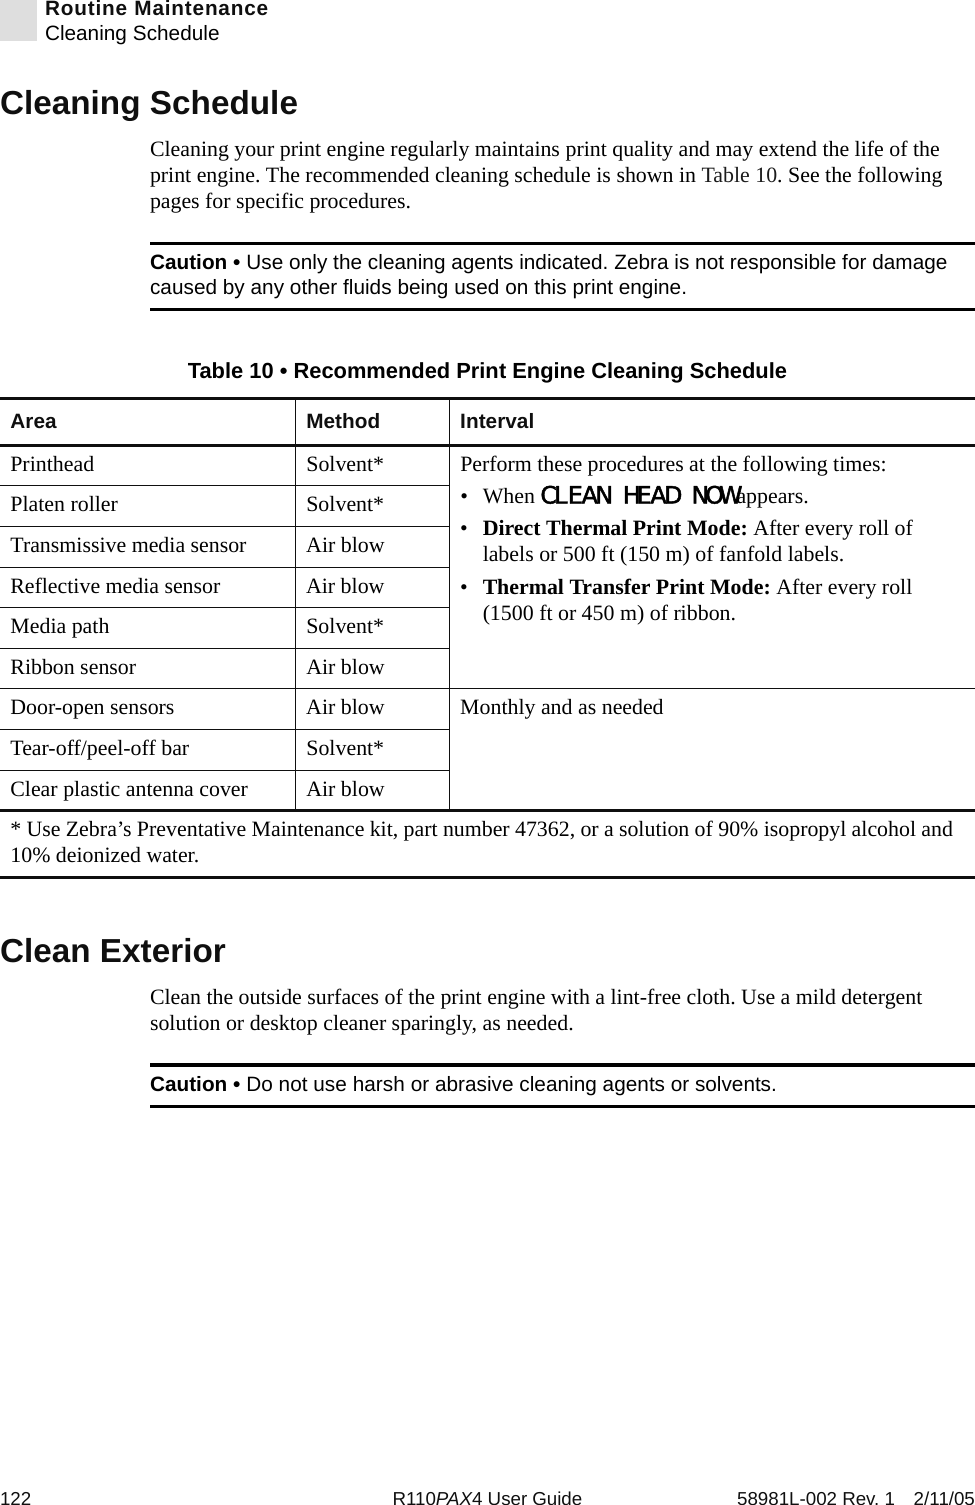 122 R110PAX4 User Guide 58981L-002 Rev. 1 2/11/05Routine MaintenanceCleaning ScheduleCleaning ScheduleCleaning your print engine regularly maintains print quality and may extend the life of the print engine. The recommended cleaning schedule is shown in Table 10. See the following pages for specific procedures.Clean ExteriorClean the outside surfaces of the print engine with a lint-free cloth. Use a mild detergent solution or desktop cleaner sparingly, as needed.Caution • Use only the cleaning agents indicated. Zebra is not responsible for damage caused by any other fluids being used on this print engine.Table 10 • Recommended Print Engine Cleaning ScheduleArea Method IntervalPrinthead Solvent* Perform these procedures at the following times:•When CLEAN HEAD NOWappears.•Direct Thermal Print Mode: After every roll of labels or 500 ft (150 m) of fanfold labels.•Thermal Transfer Print Mode: After every roll (1500 ft or 450 m) of ribbon.Platen roller Solvent*Transmissive media sensor Air blowReflective media sensor Air blowMedia path Solvent*Ribbon sensor Air blowDoor-open sensors Air blow Monthly and as neededTear-off/peel-off bar Solvent*Clear plastic antenna cover Air blow* Use Zebra’s Preventative Maintenance kit, part number 47362, or a solution of 90% isopropyl alcohol and 10% deionized water. Caution • Do not use harsh or abrasive cleaning agents or solvents.